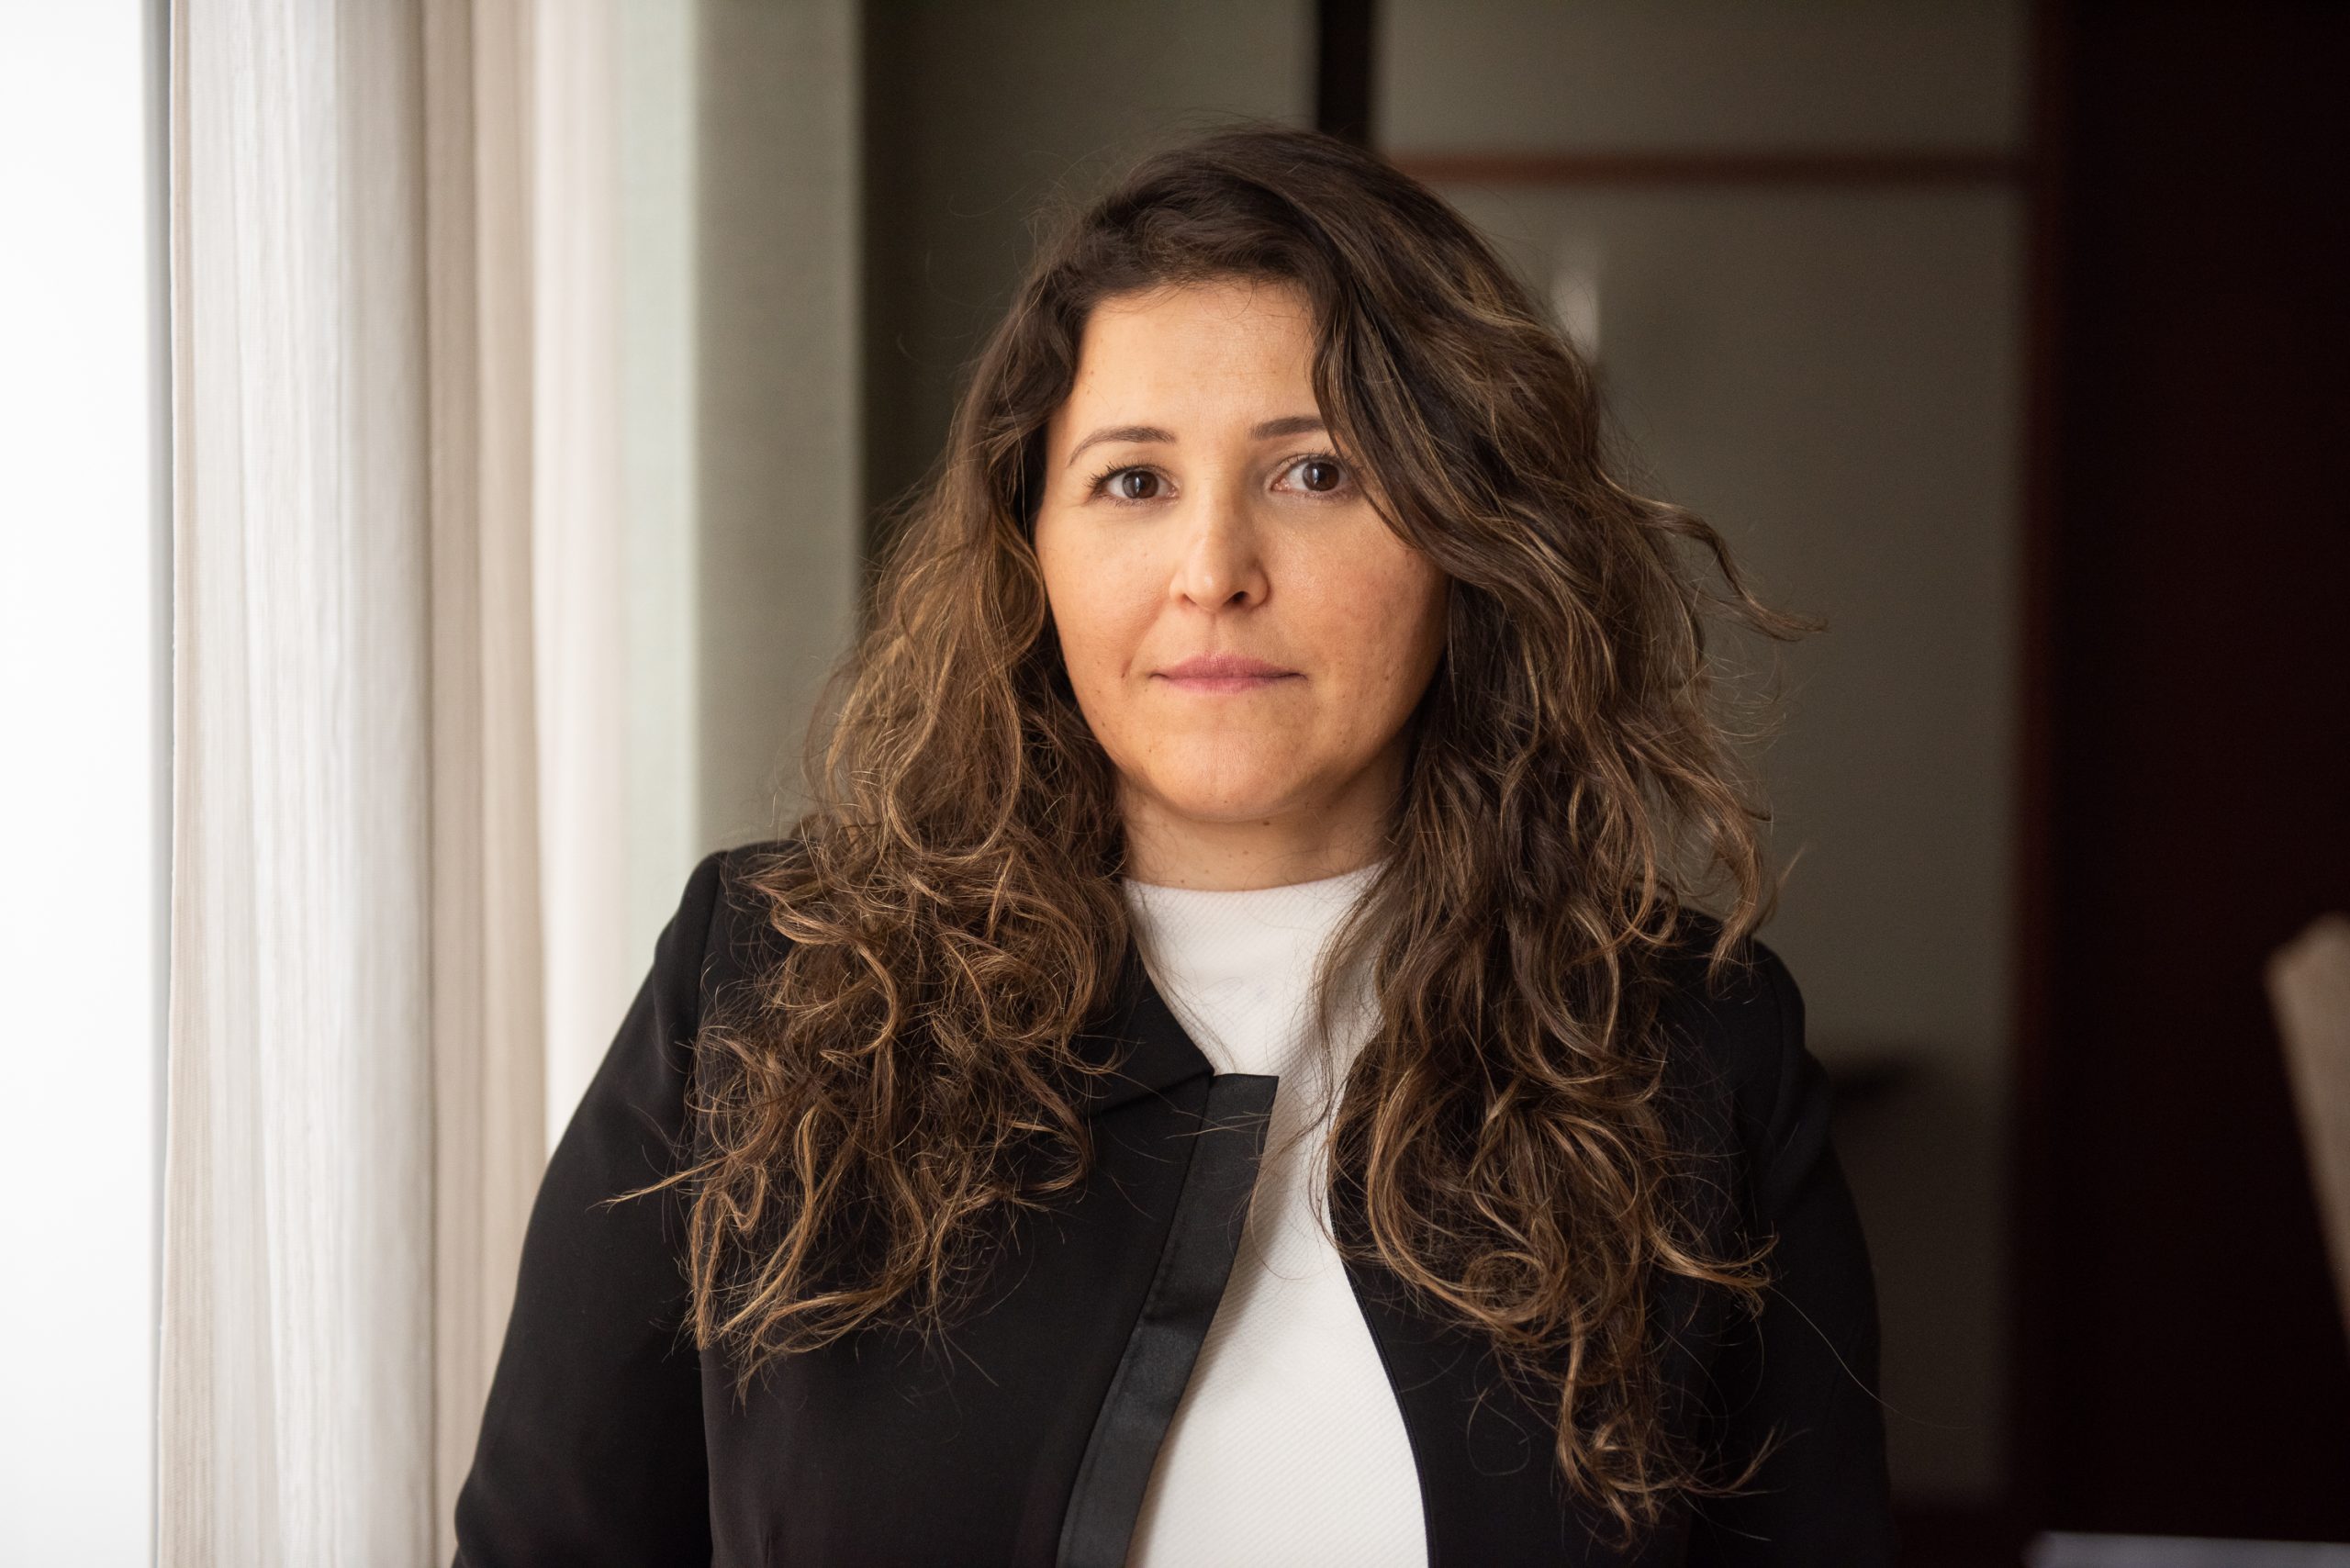 Katia Haddad's curly brown hair billows down over her black blazer and white shirt.